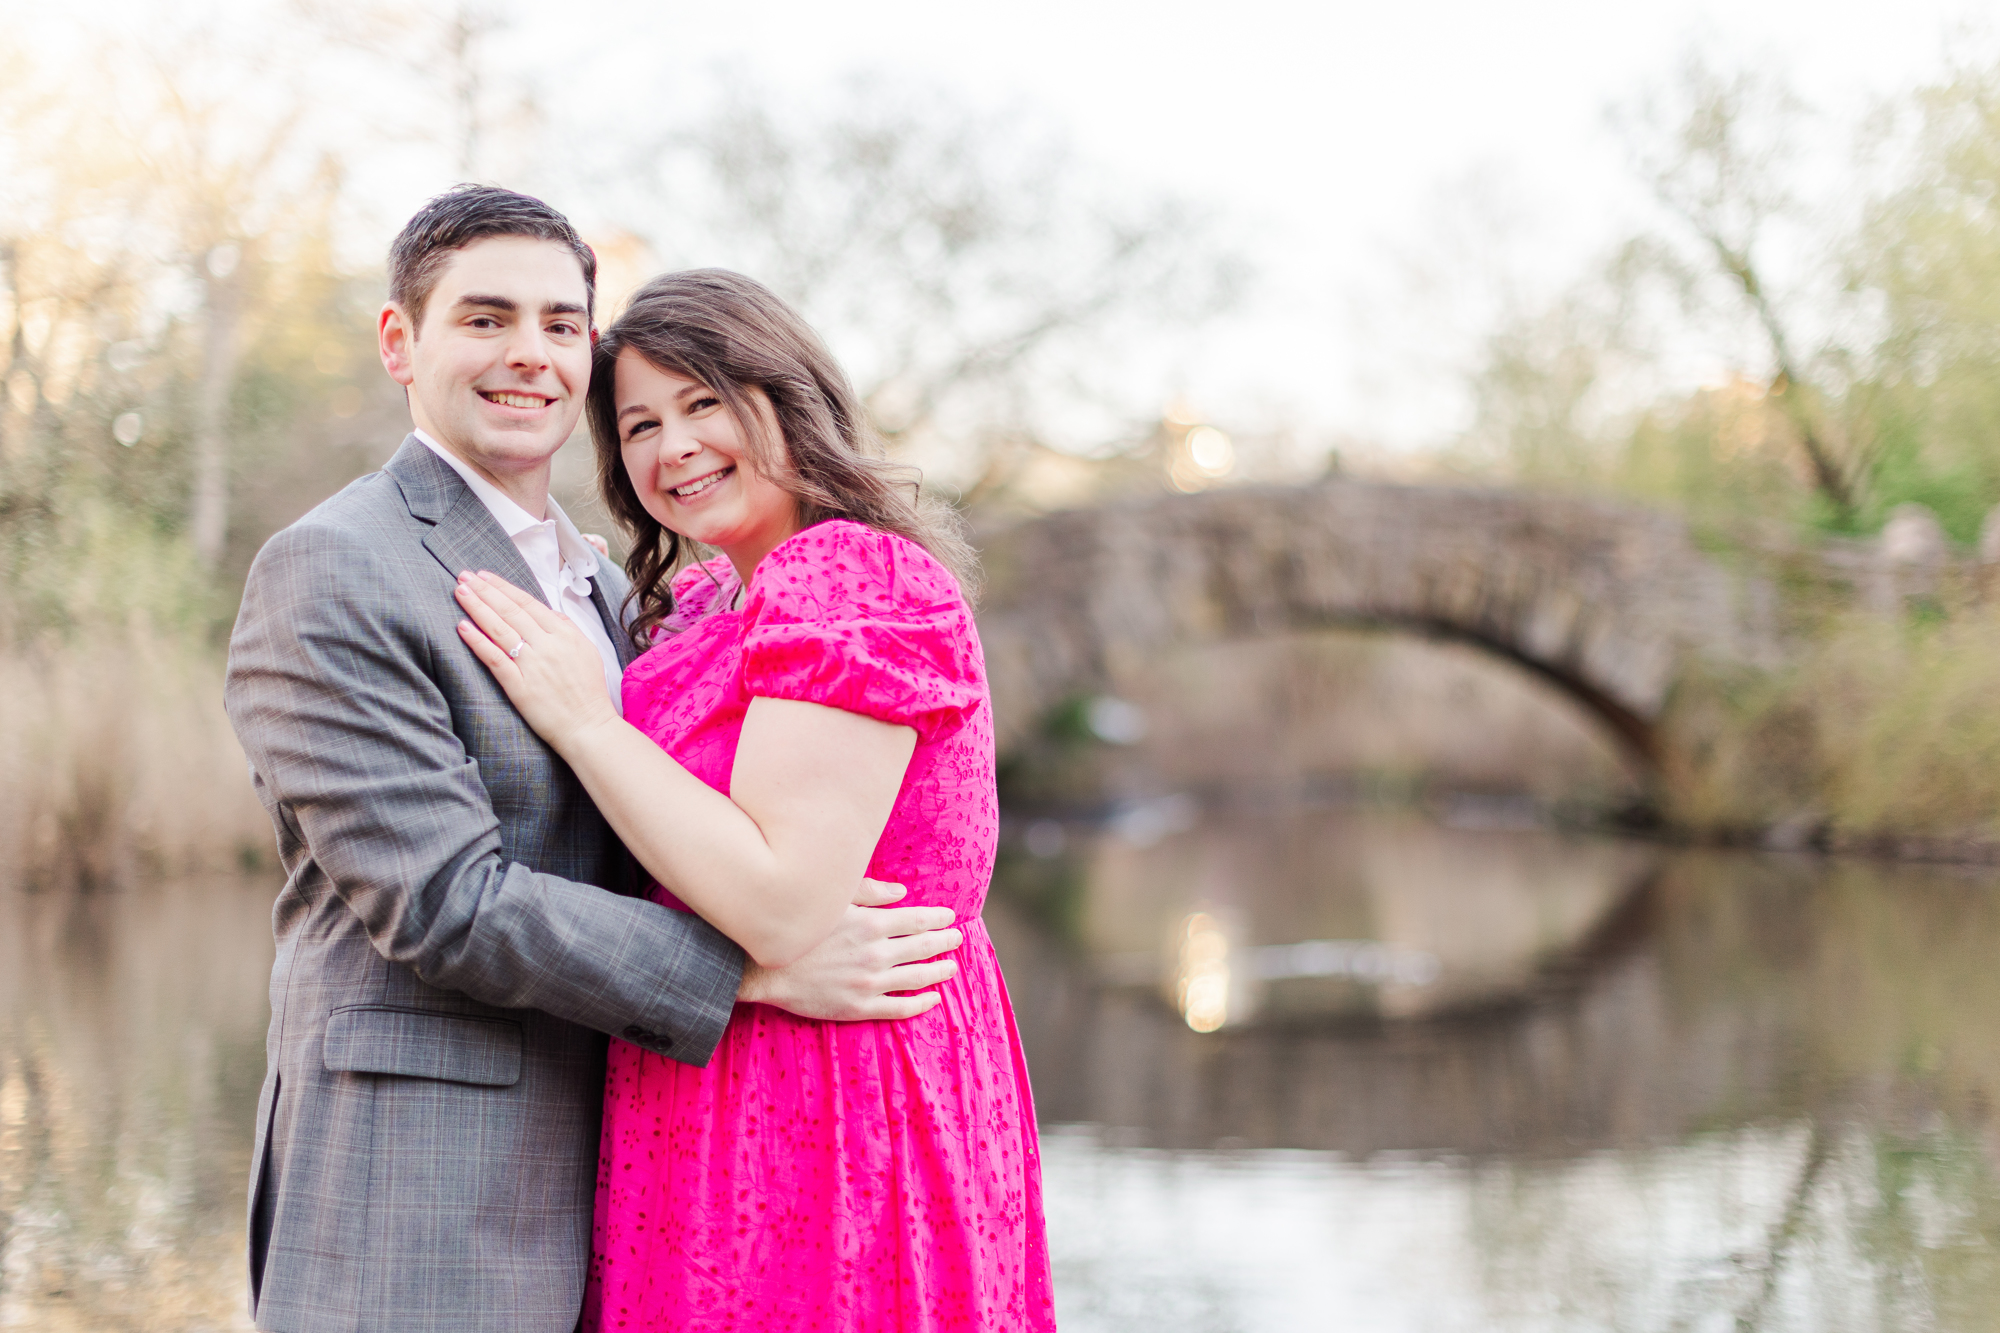 Striking Spring Engagement Photography in NYC